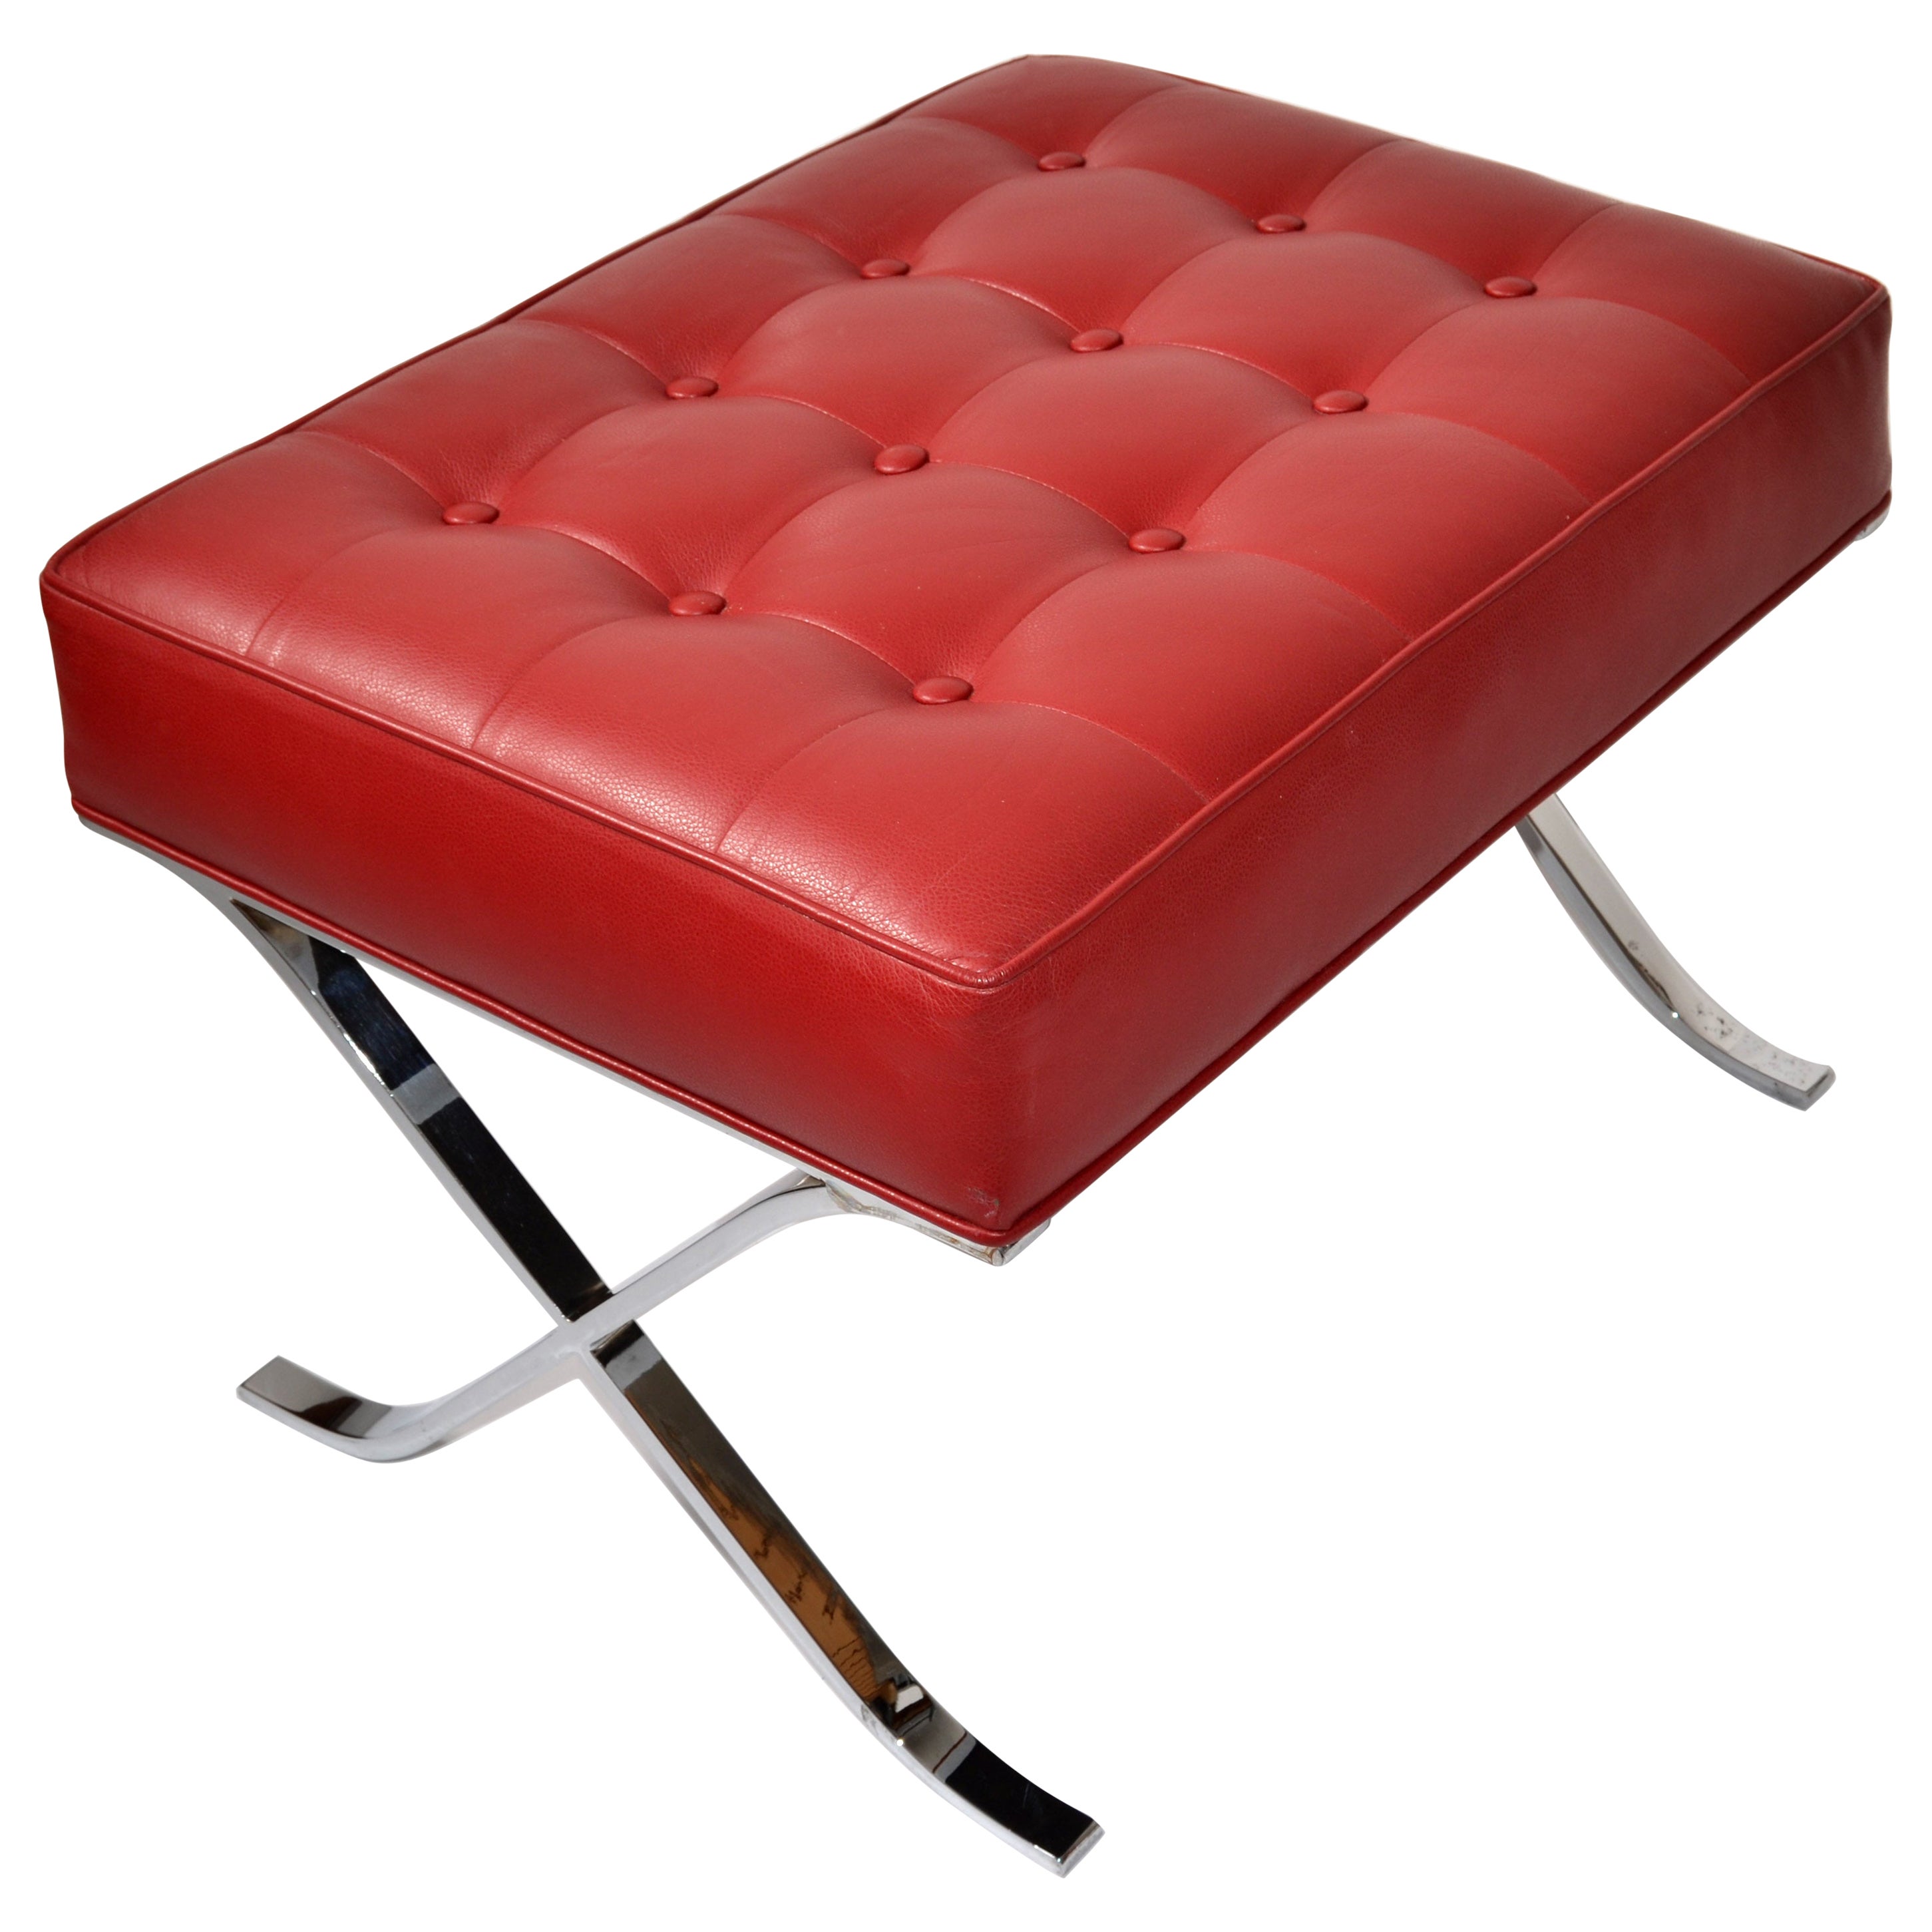 Mies Van Der Rohe Style Barcelona Chromed Steel Red Vinyl Ottoman Footstool 1980 For Sale